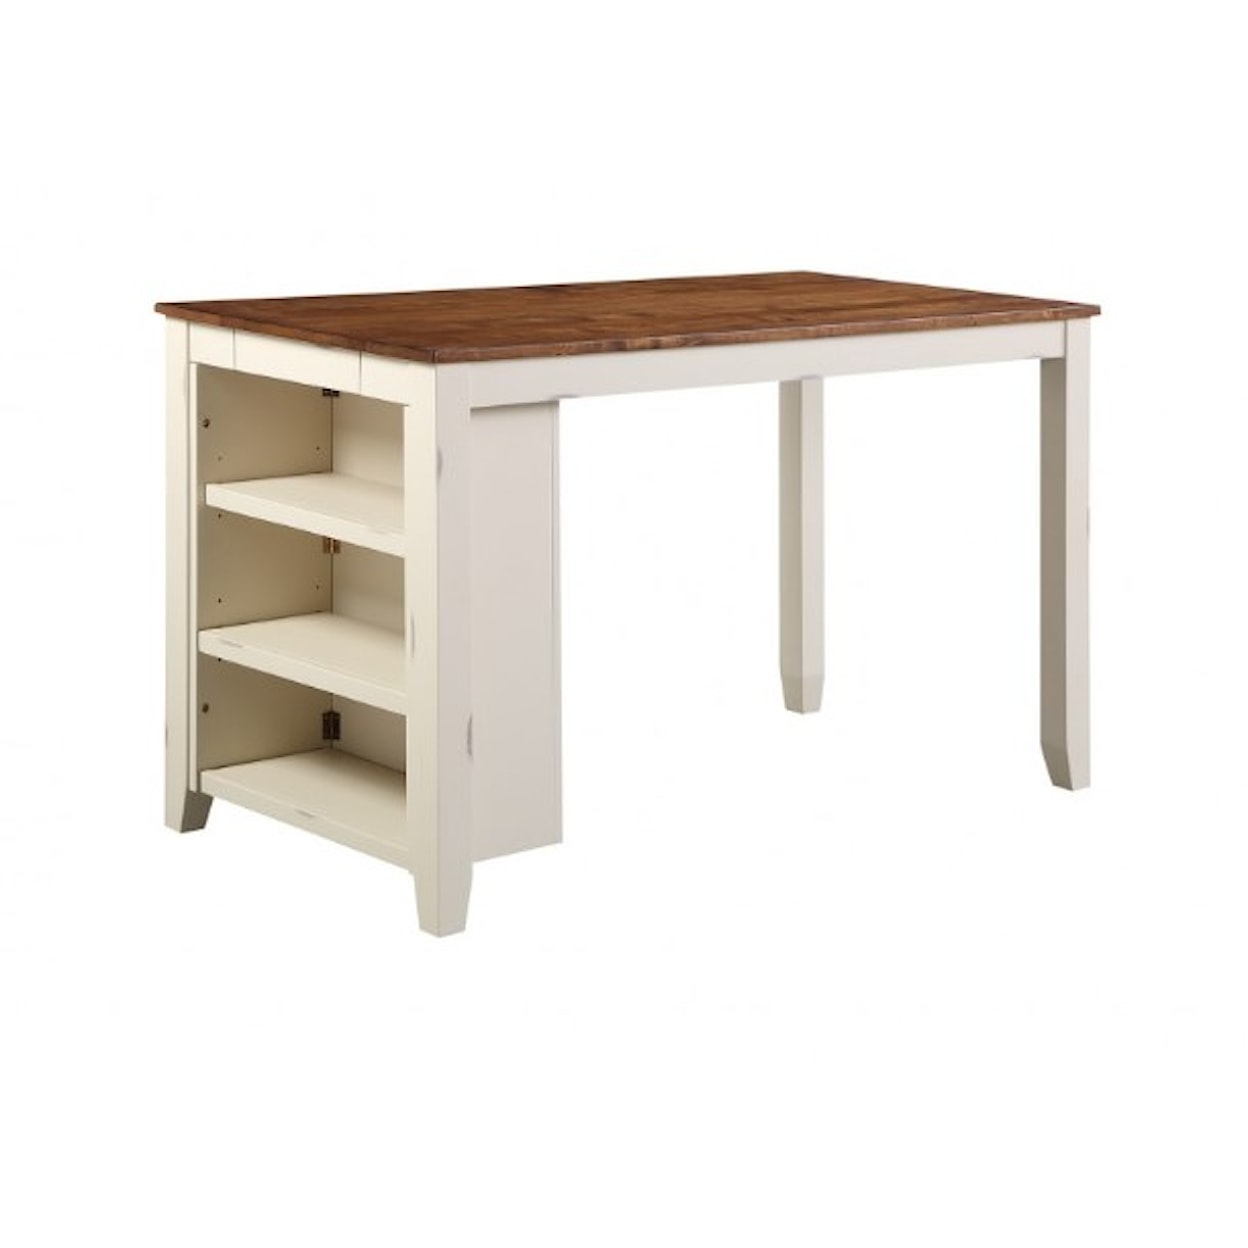 Winners Only Woodbridge Counter-Height Dining Table